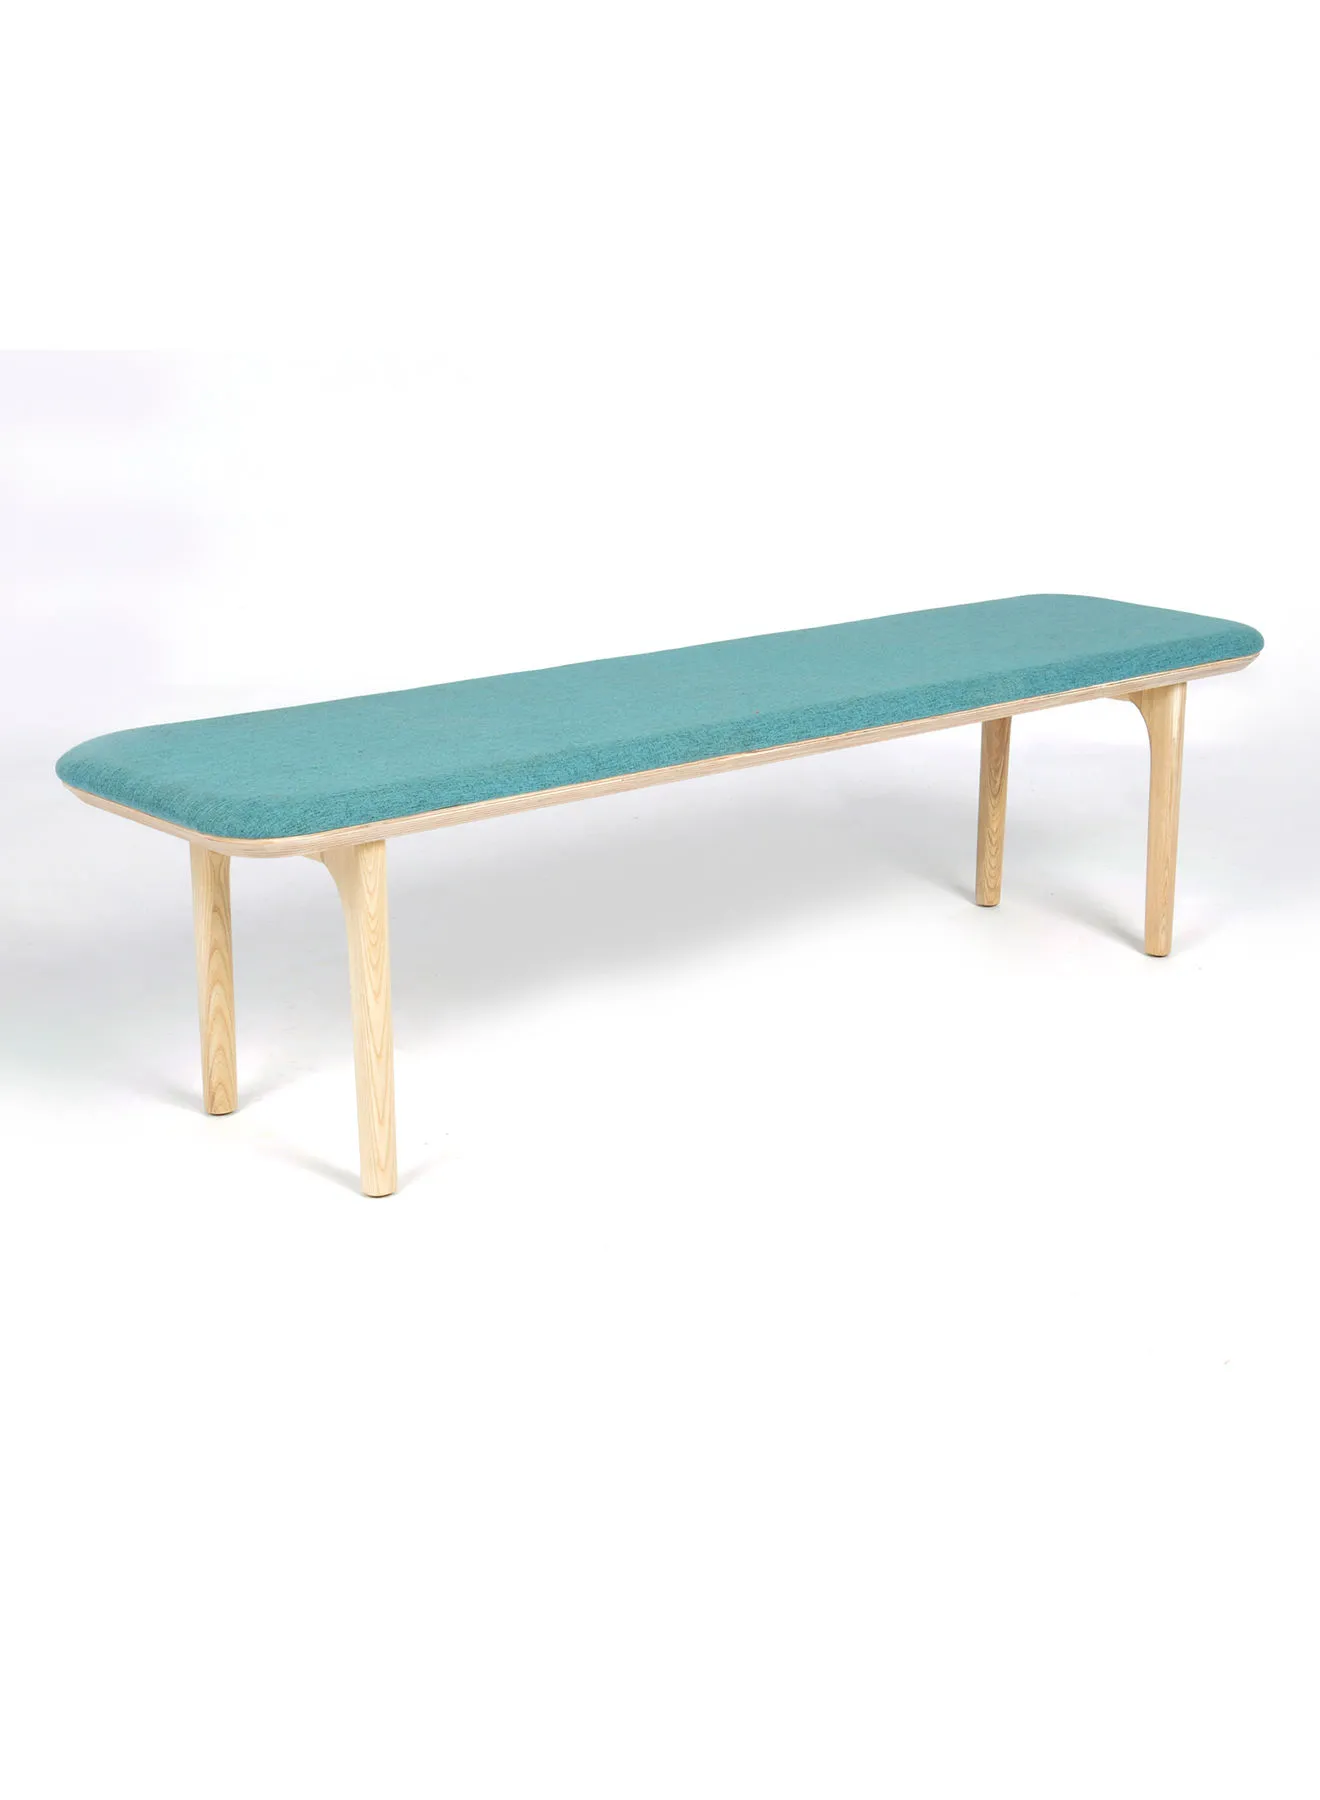 ebb & flow Modern Style Slant Bench Table High Quality For Living Rooms Entryways Decor Sturdy By Unique Fabric Beige/Blue 160 x 42 x 45cm